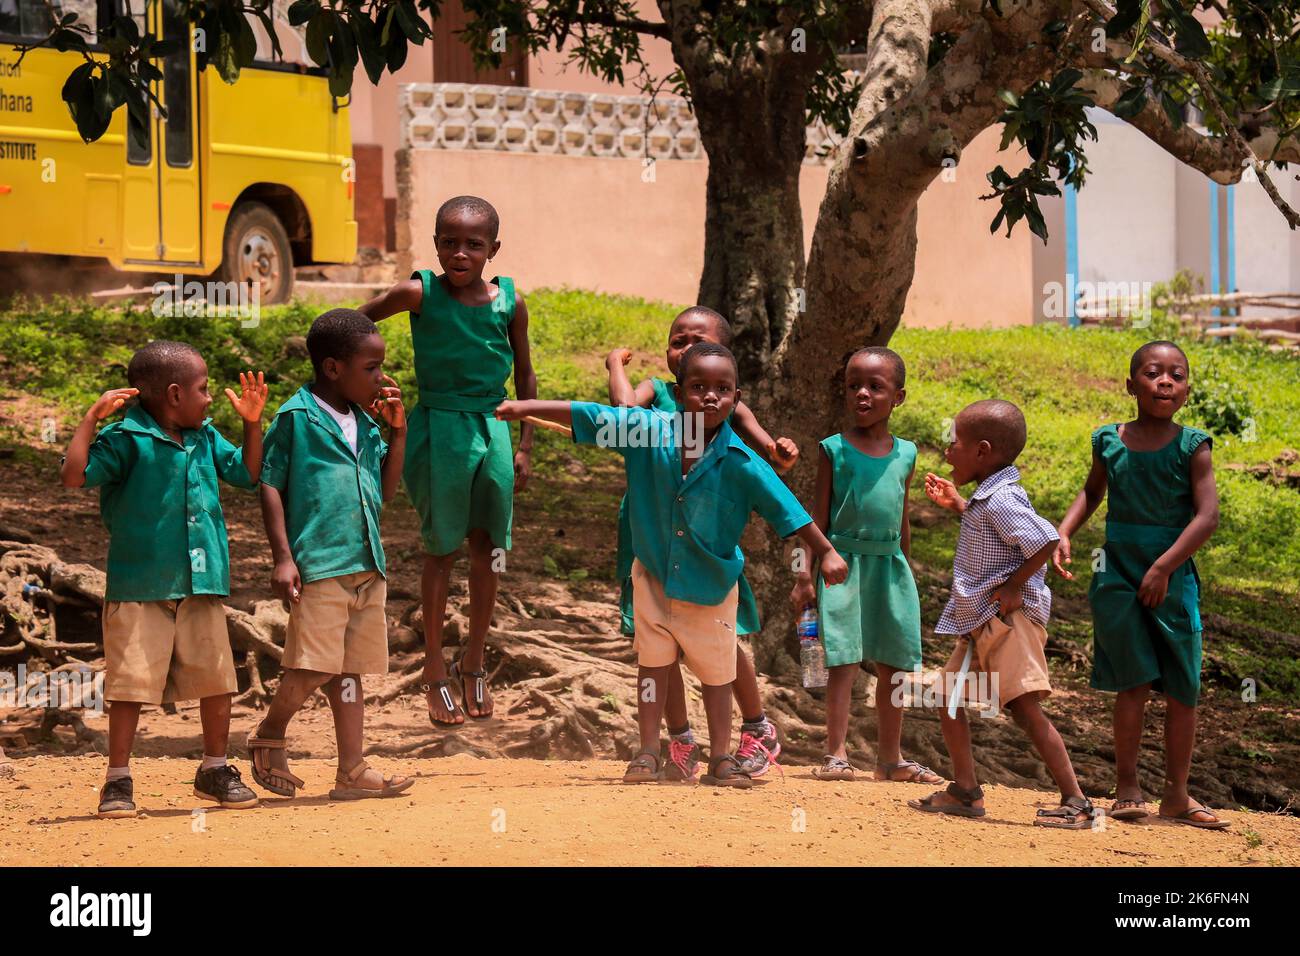 Amedzofe, Ghana - April 07, 2022: African Pupils in Colorful School Uniform near the small Ghana Amedzofe town Stock Photo